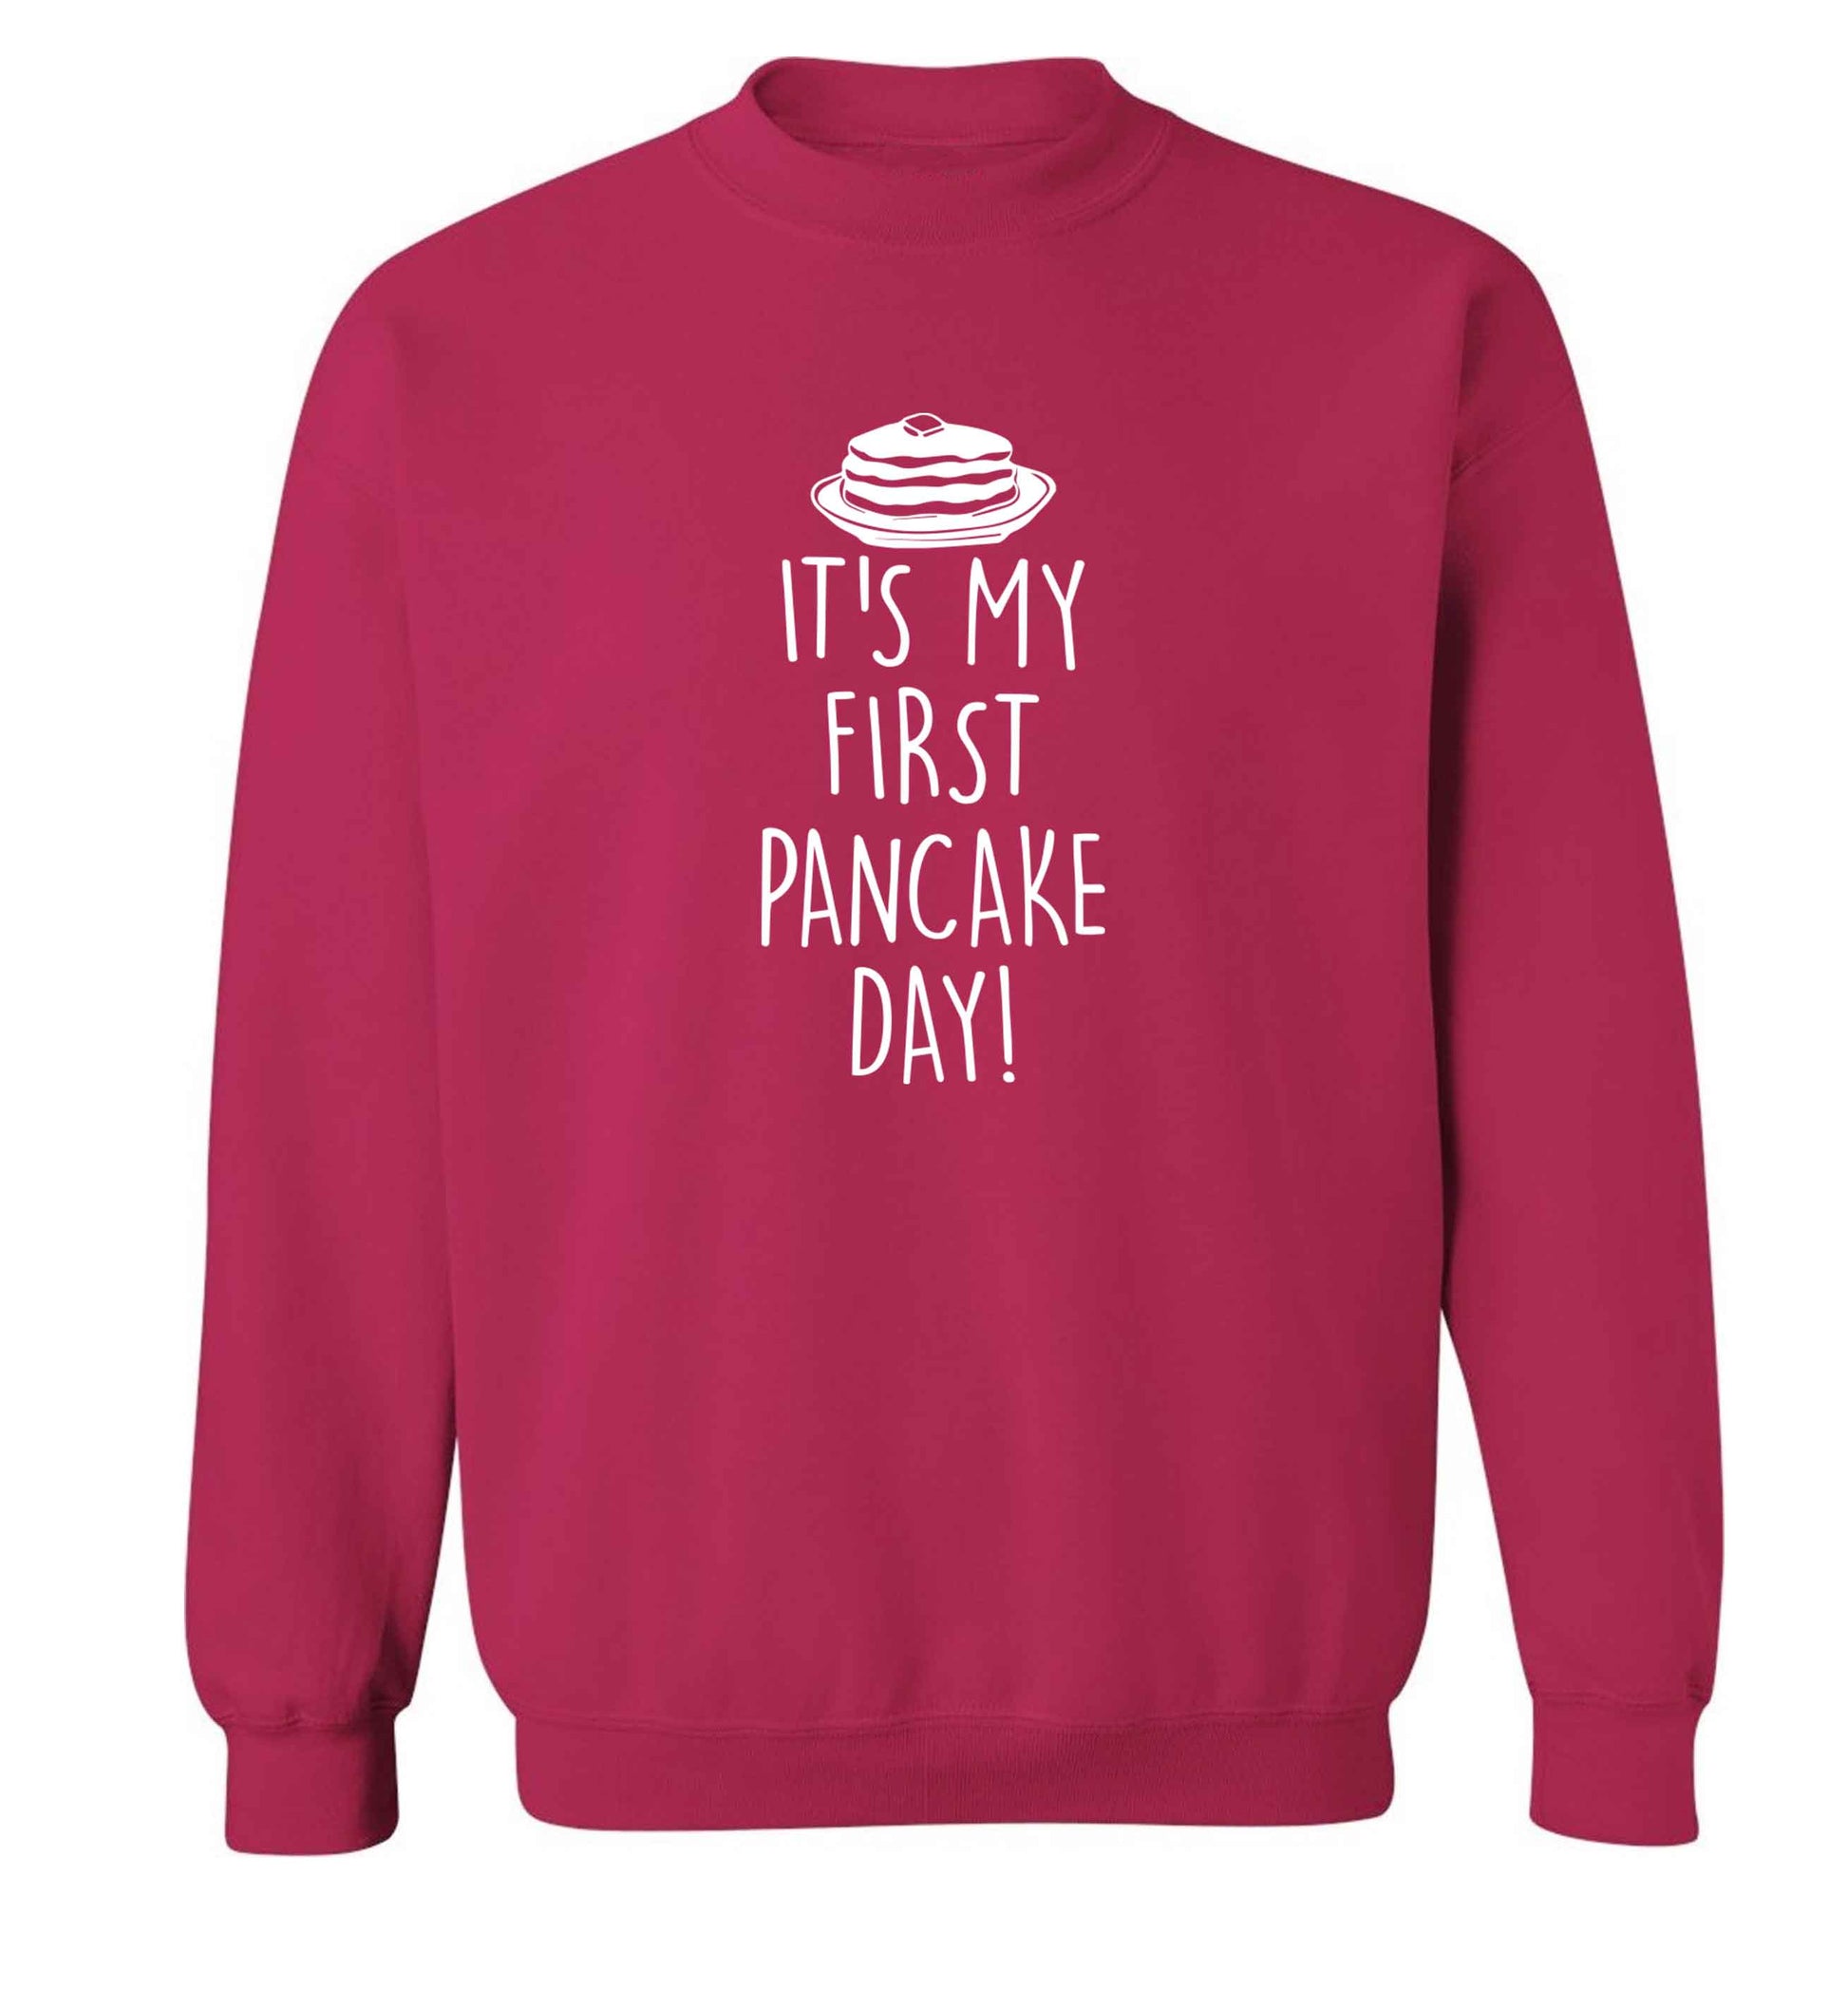 It's my first pancake day adult's unisex pink sweater 2XL